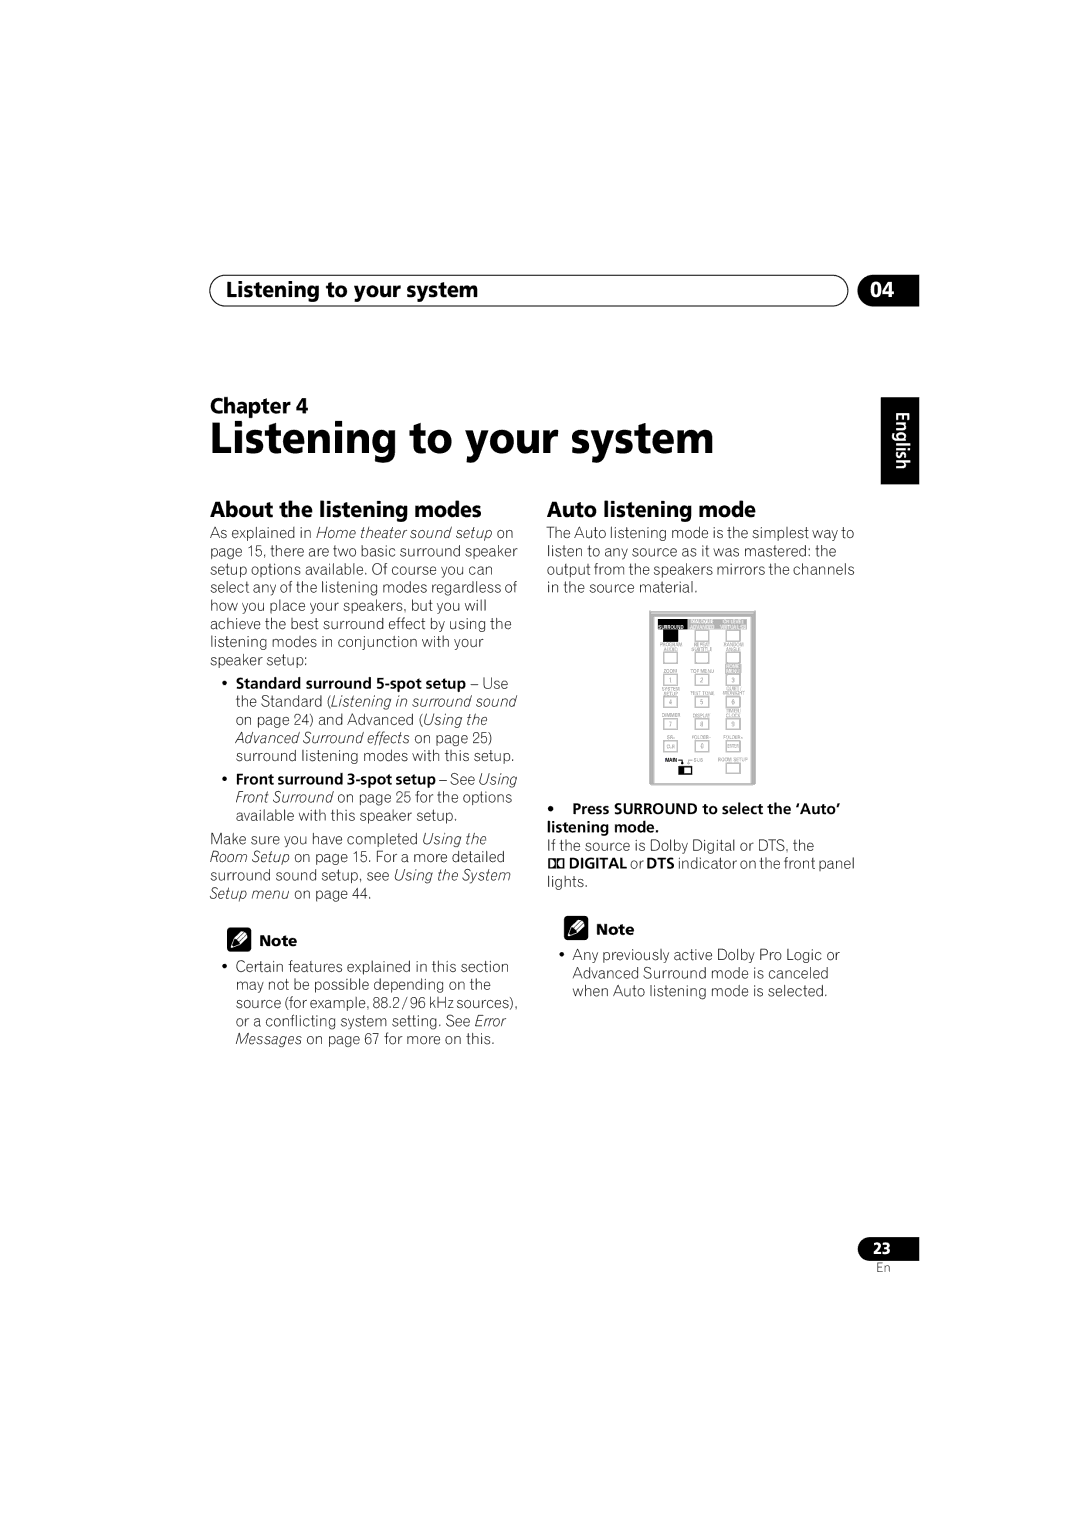 Magnadyne XV-DV424, XV-DV323, S-DV424 Listening to your system Chapter, About the listening modes, Auto listening mode 